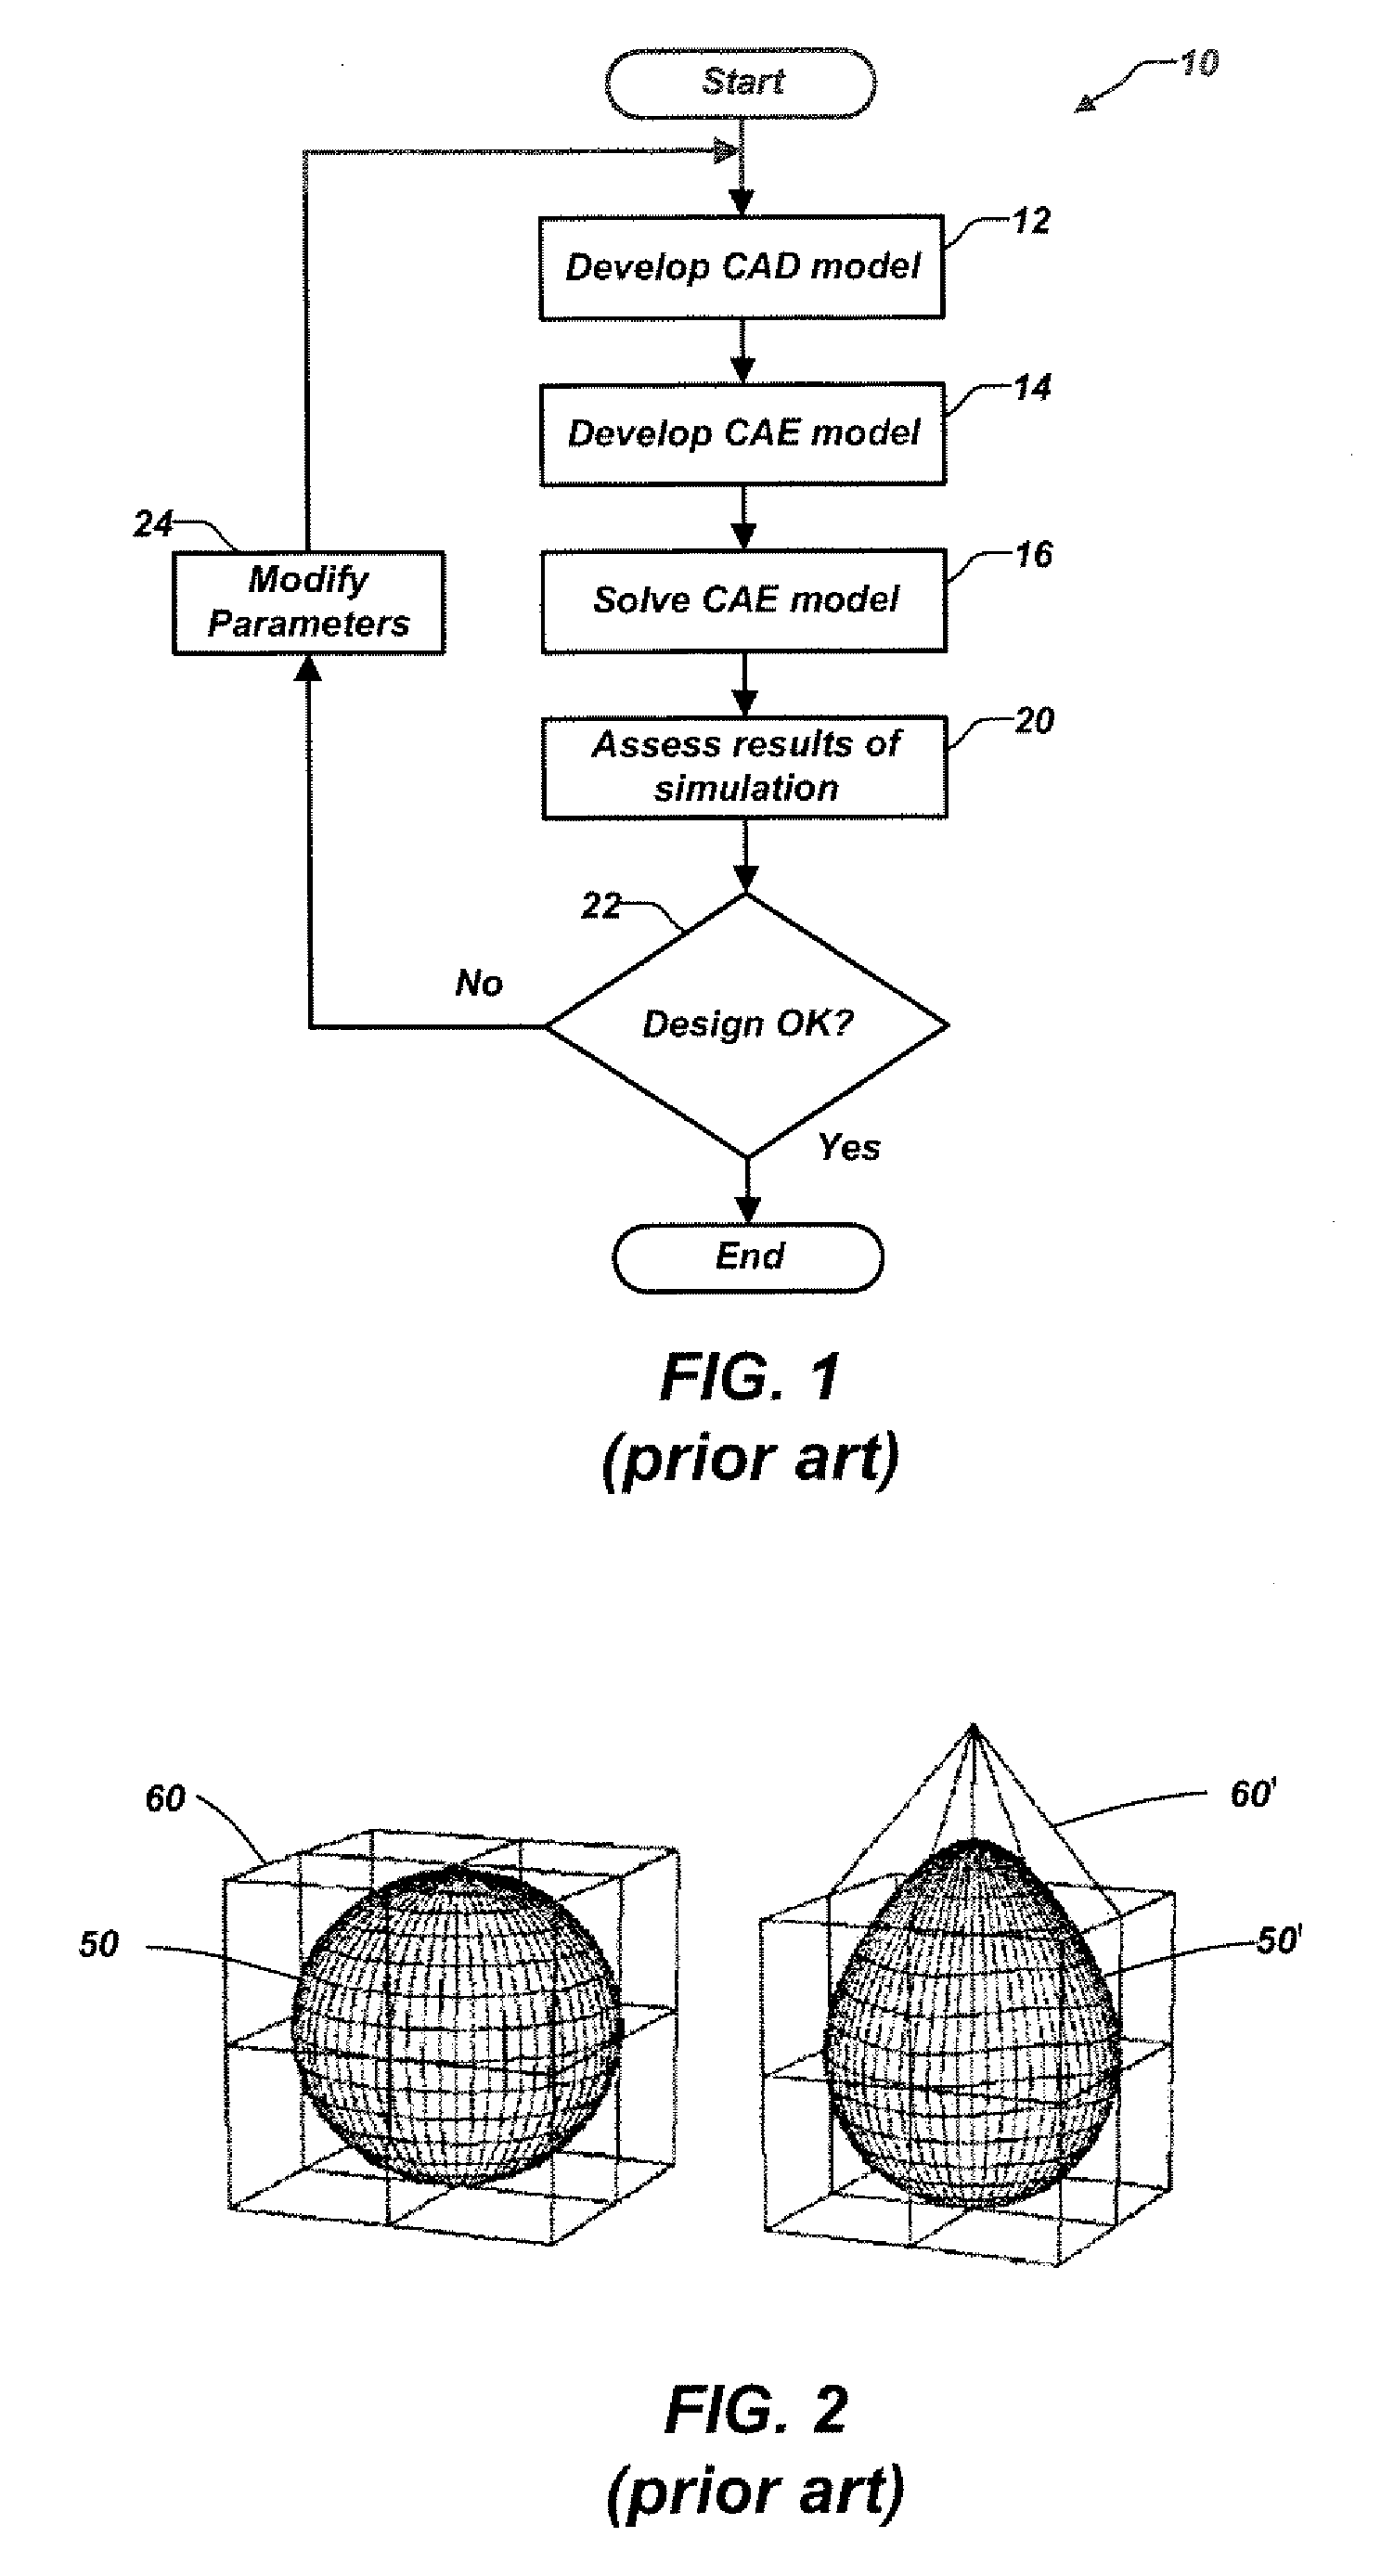 System, methods, and computer readable media, for product design using t-spline deformation